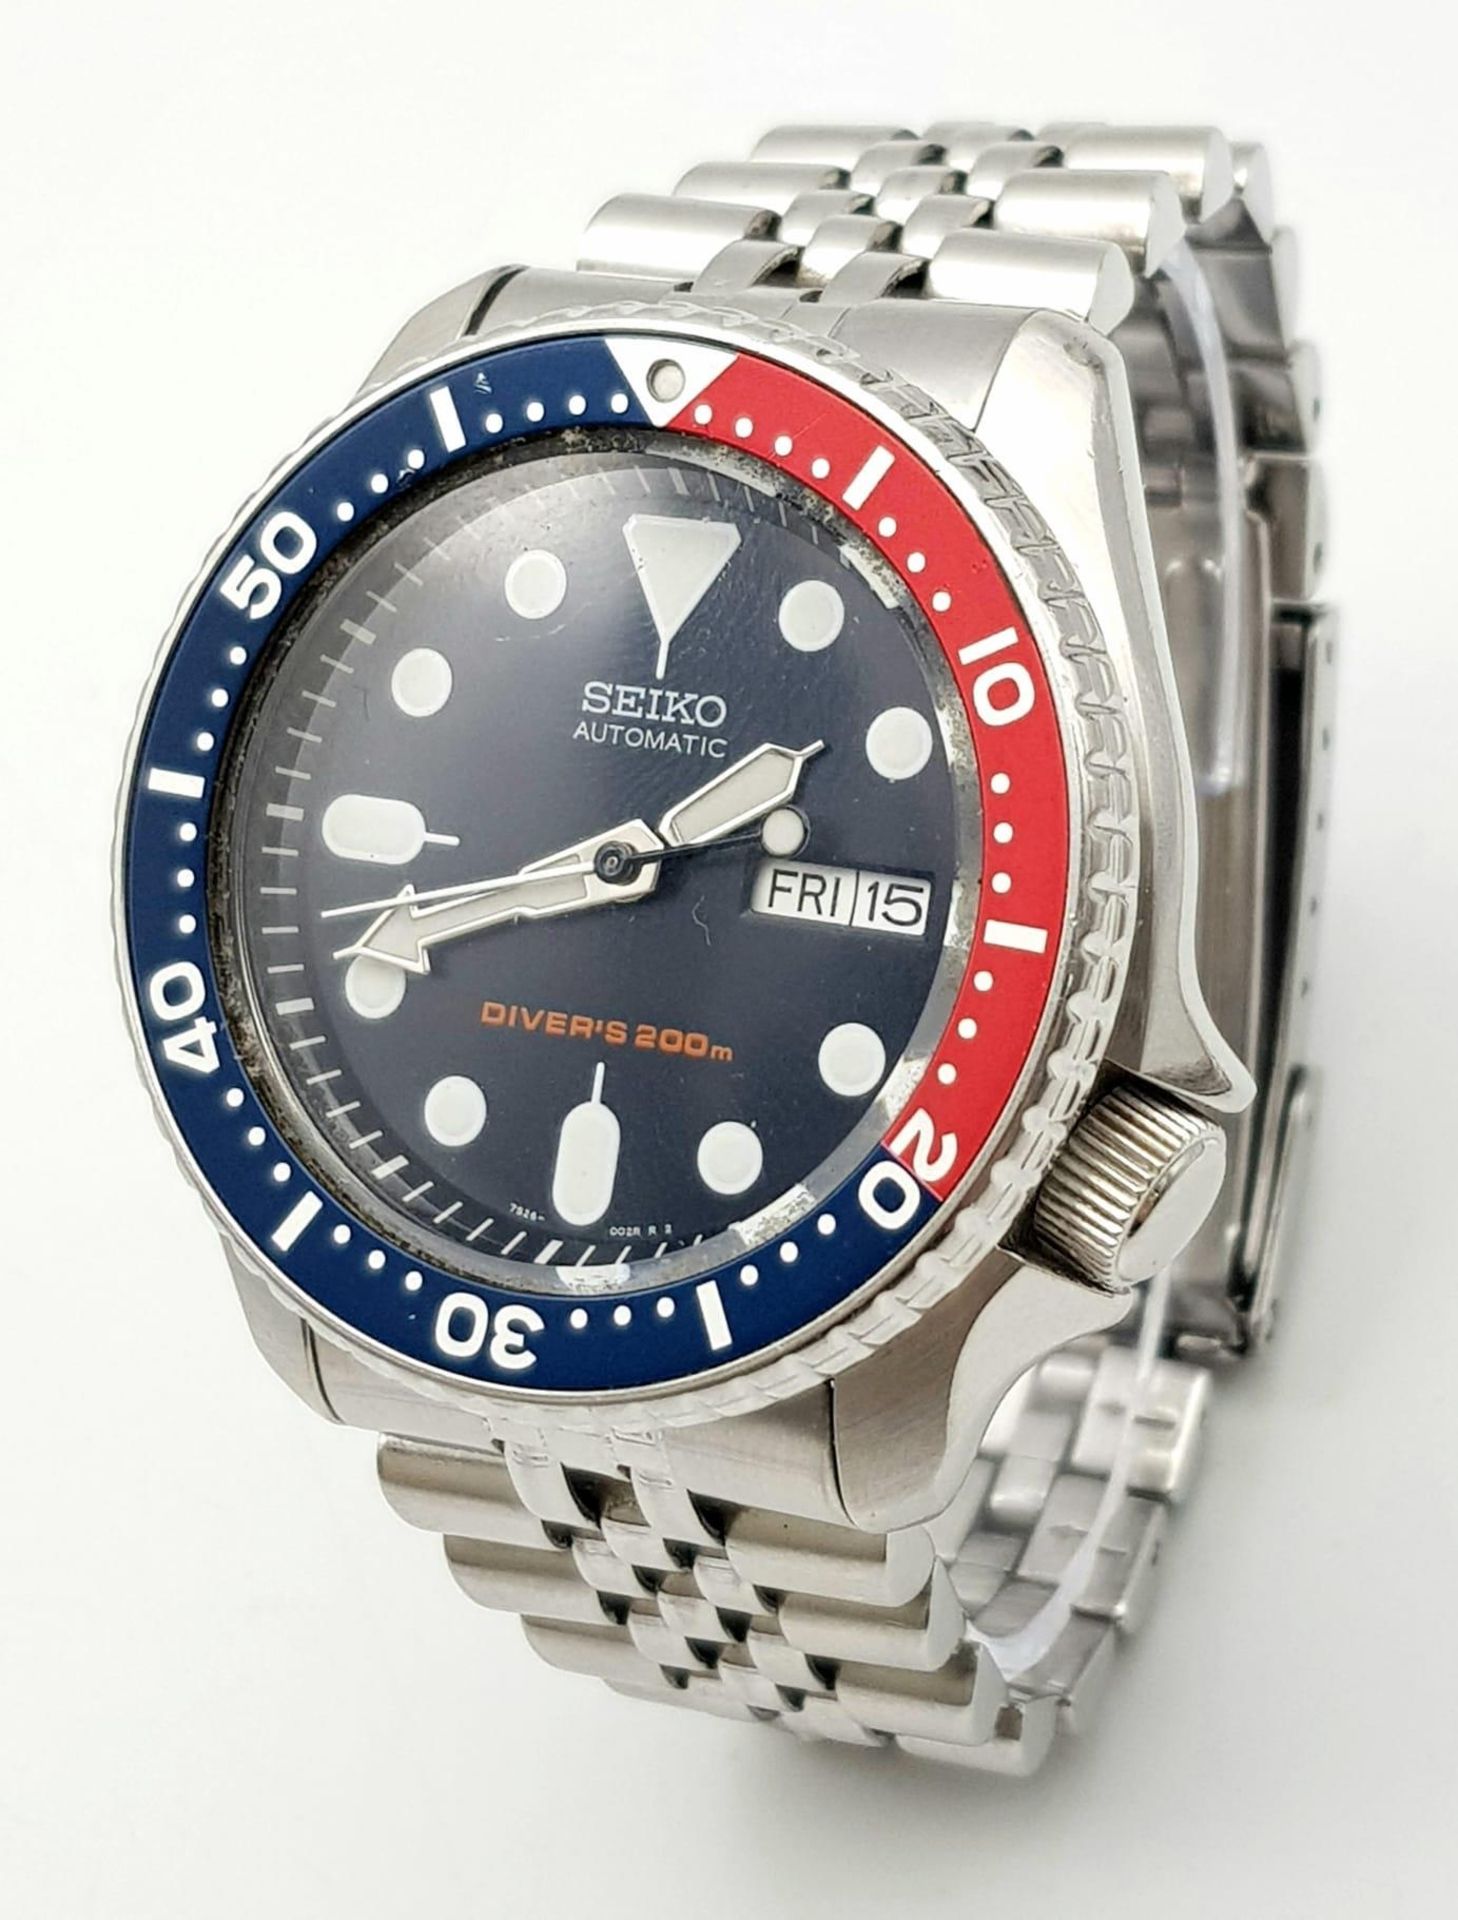 A Seiko 5 Divers 200M Automatic Gents Watch. Stainless steel bracelet and case - 42mm. Blue dial